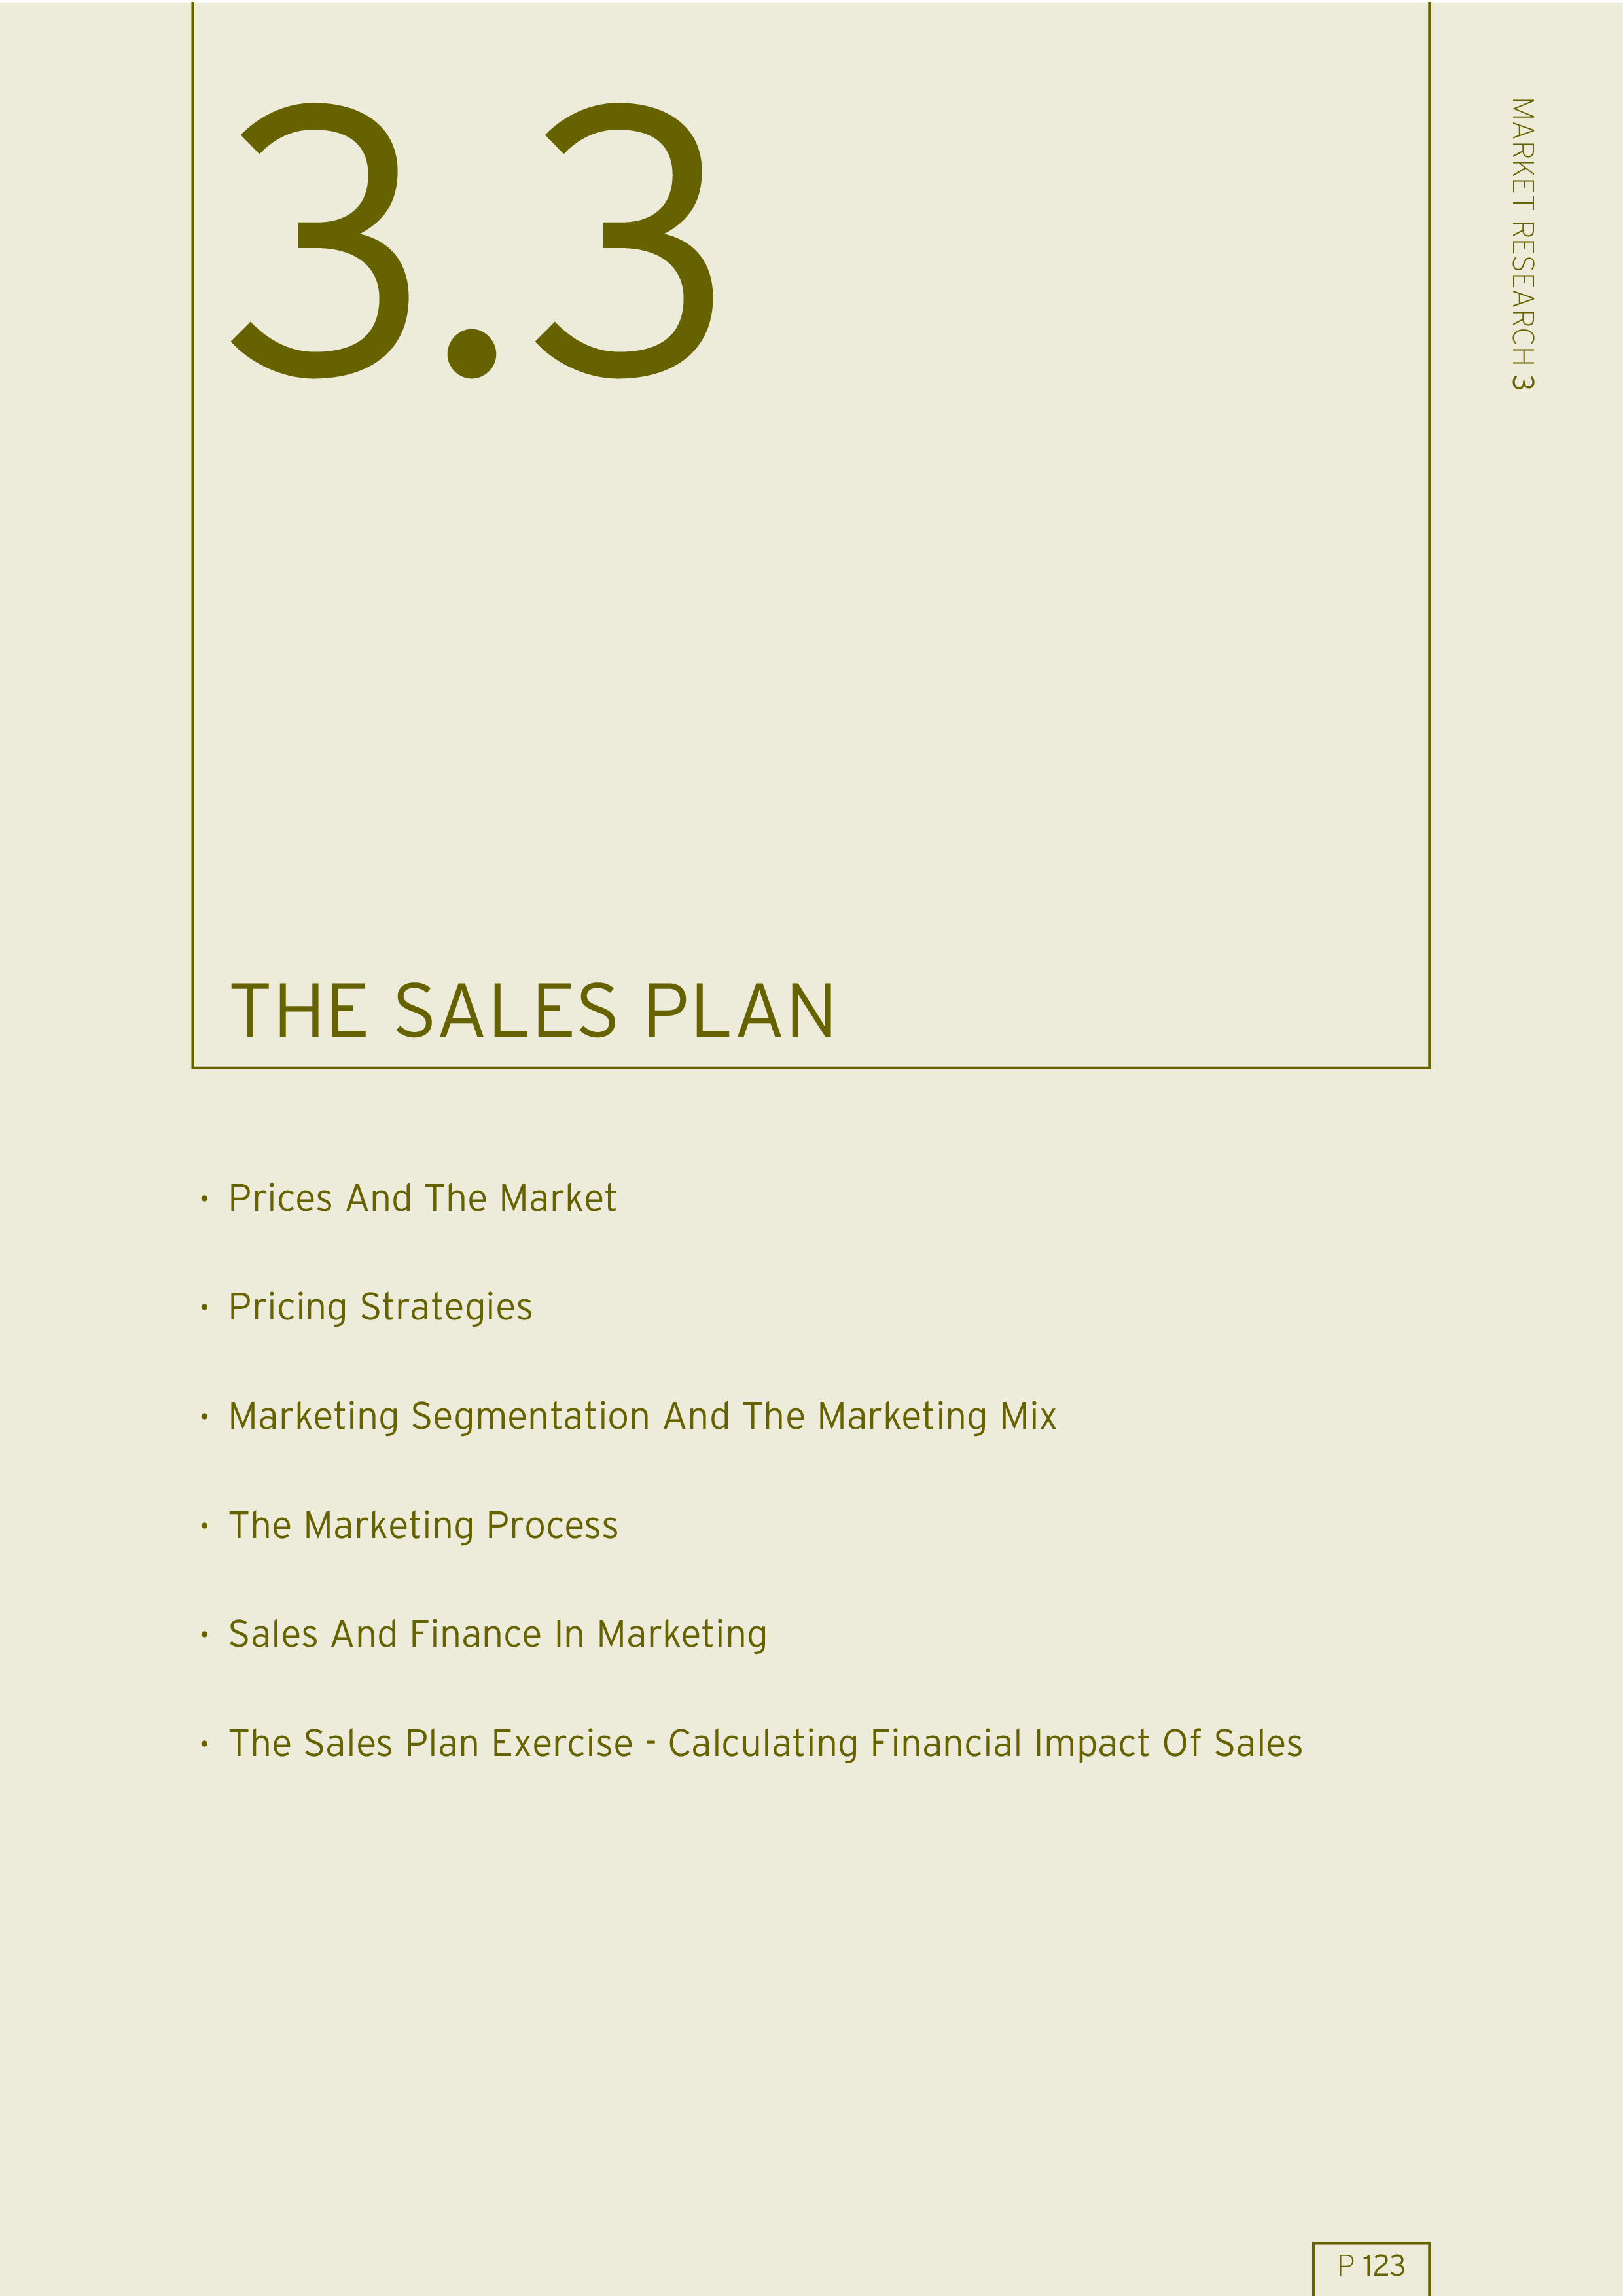 Monthly Sales Plan Format main image